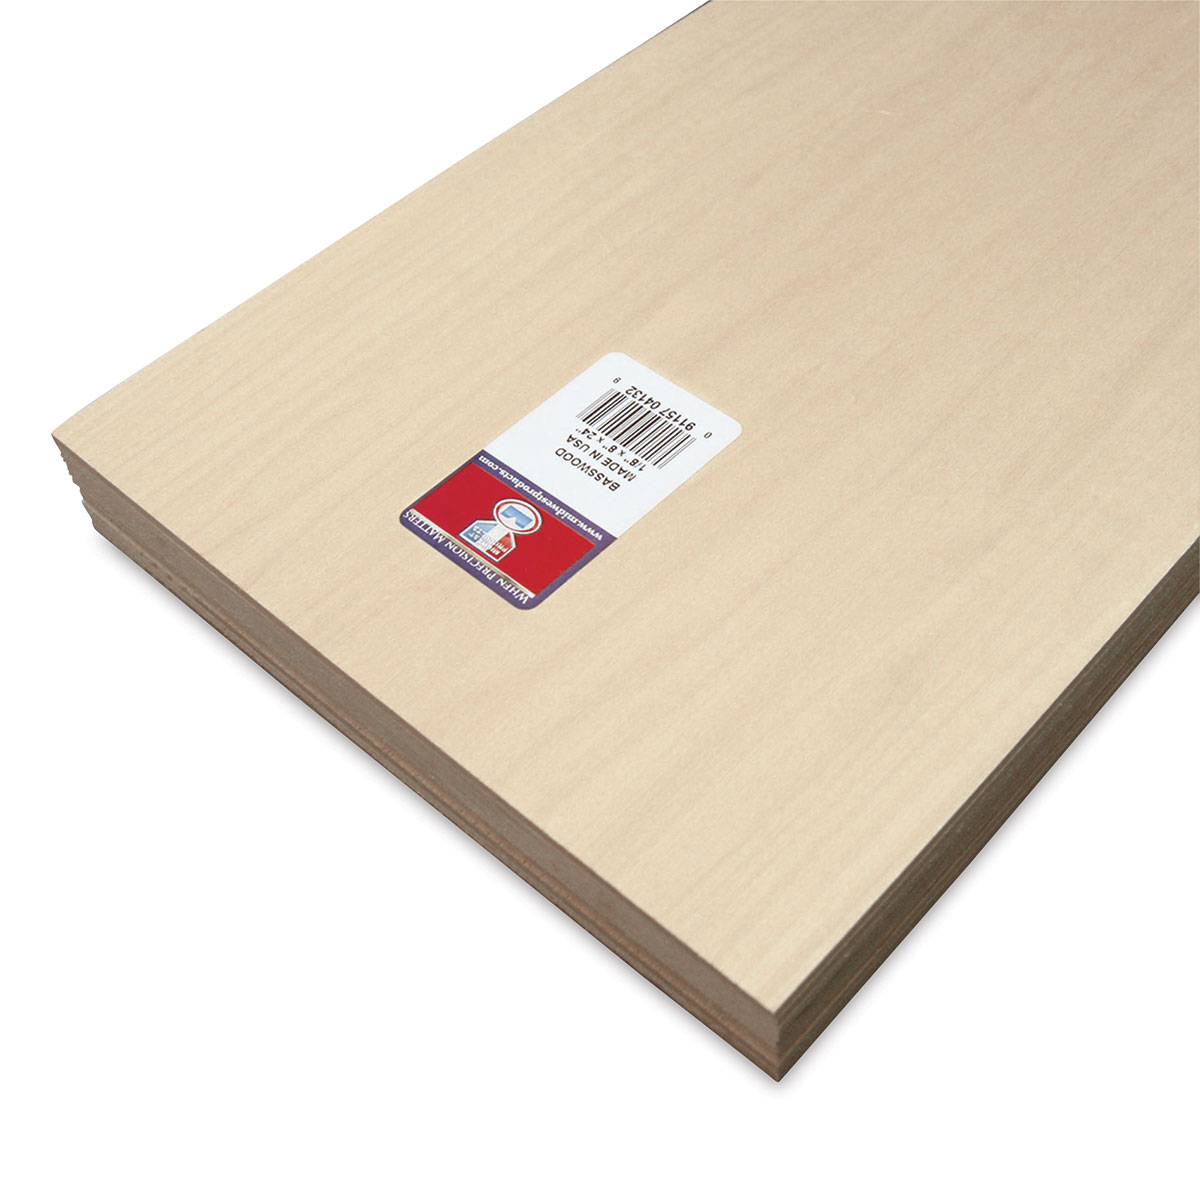 Midwest Products Genuine Basswood Sheet - 10 Sheets, 1/16 x 6 x 36